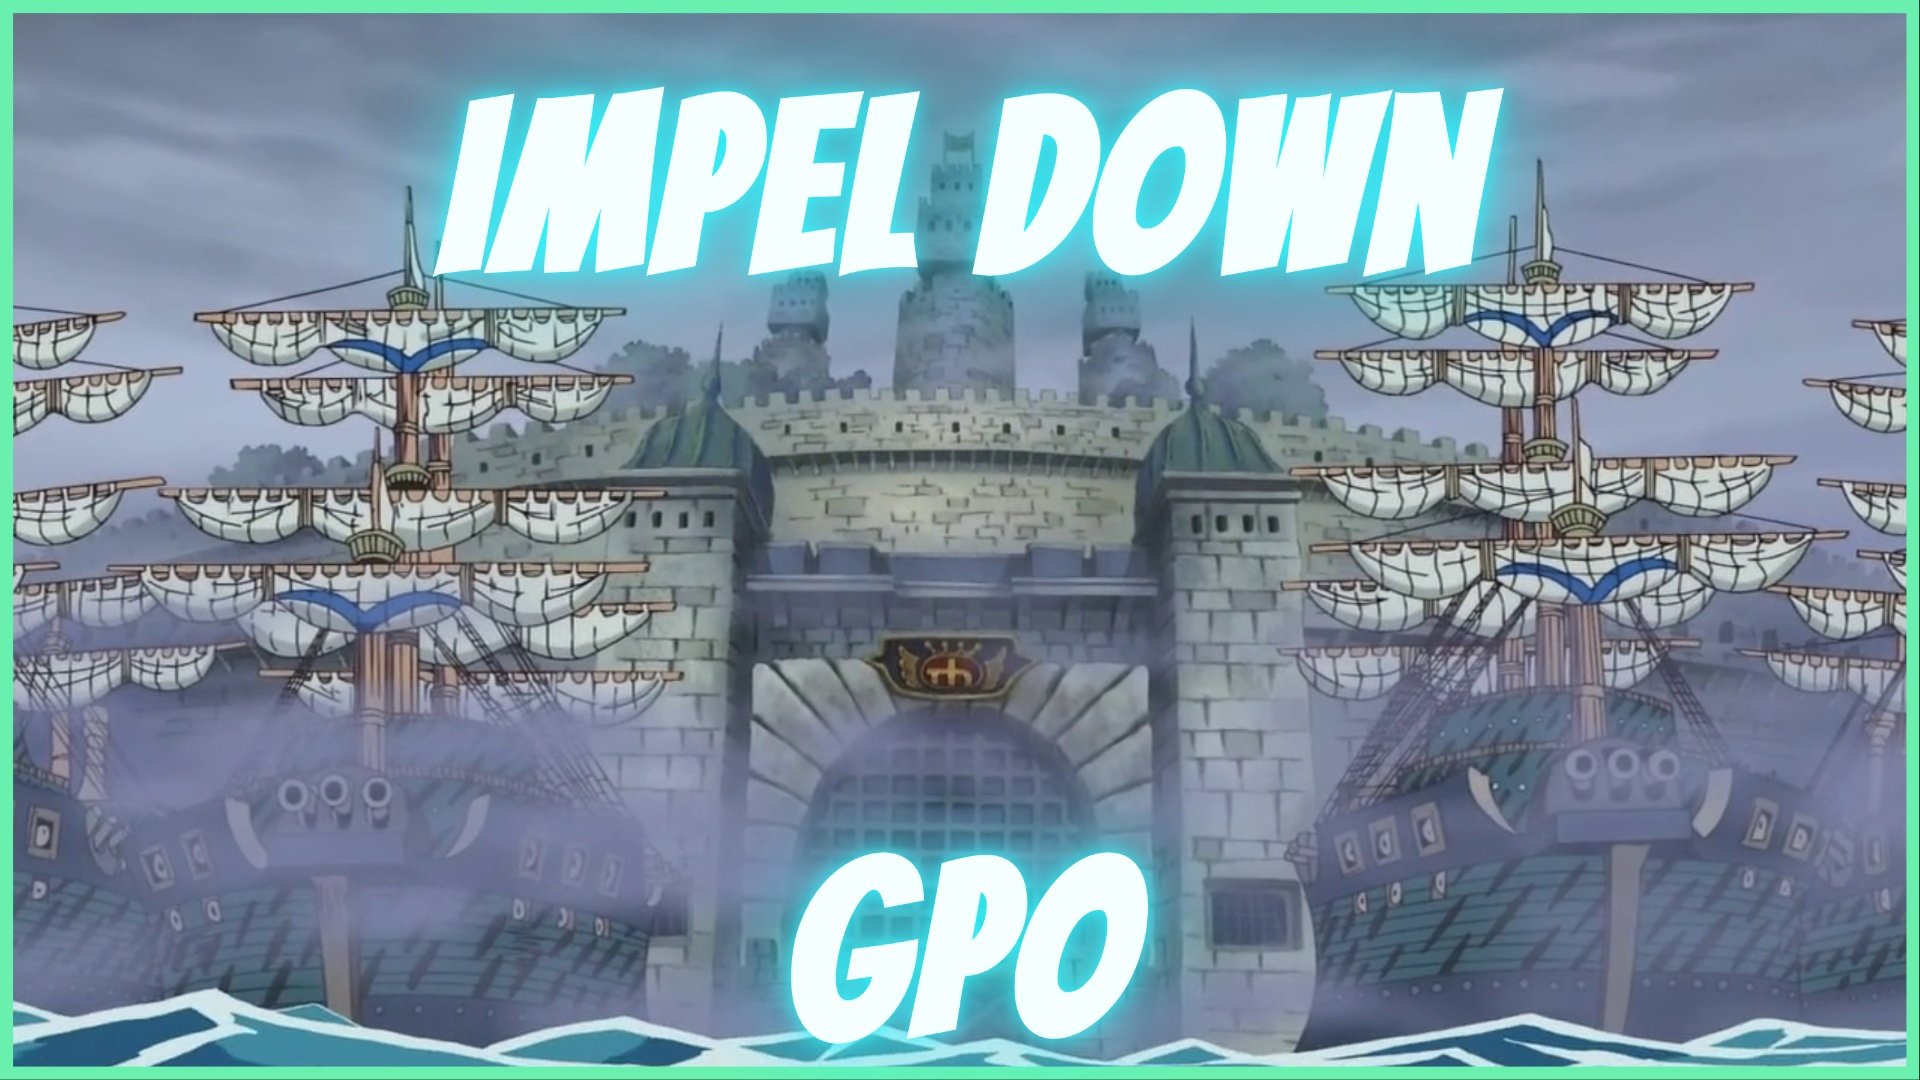 what is this? Level 6 of Impel Down?